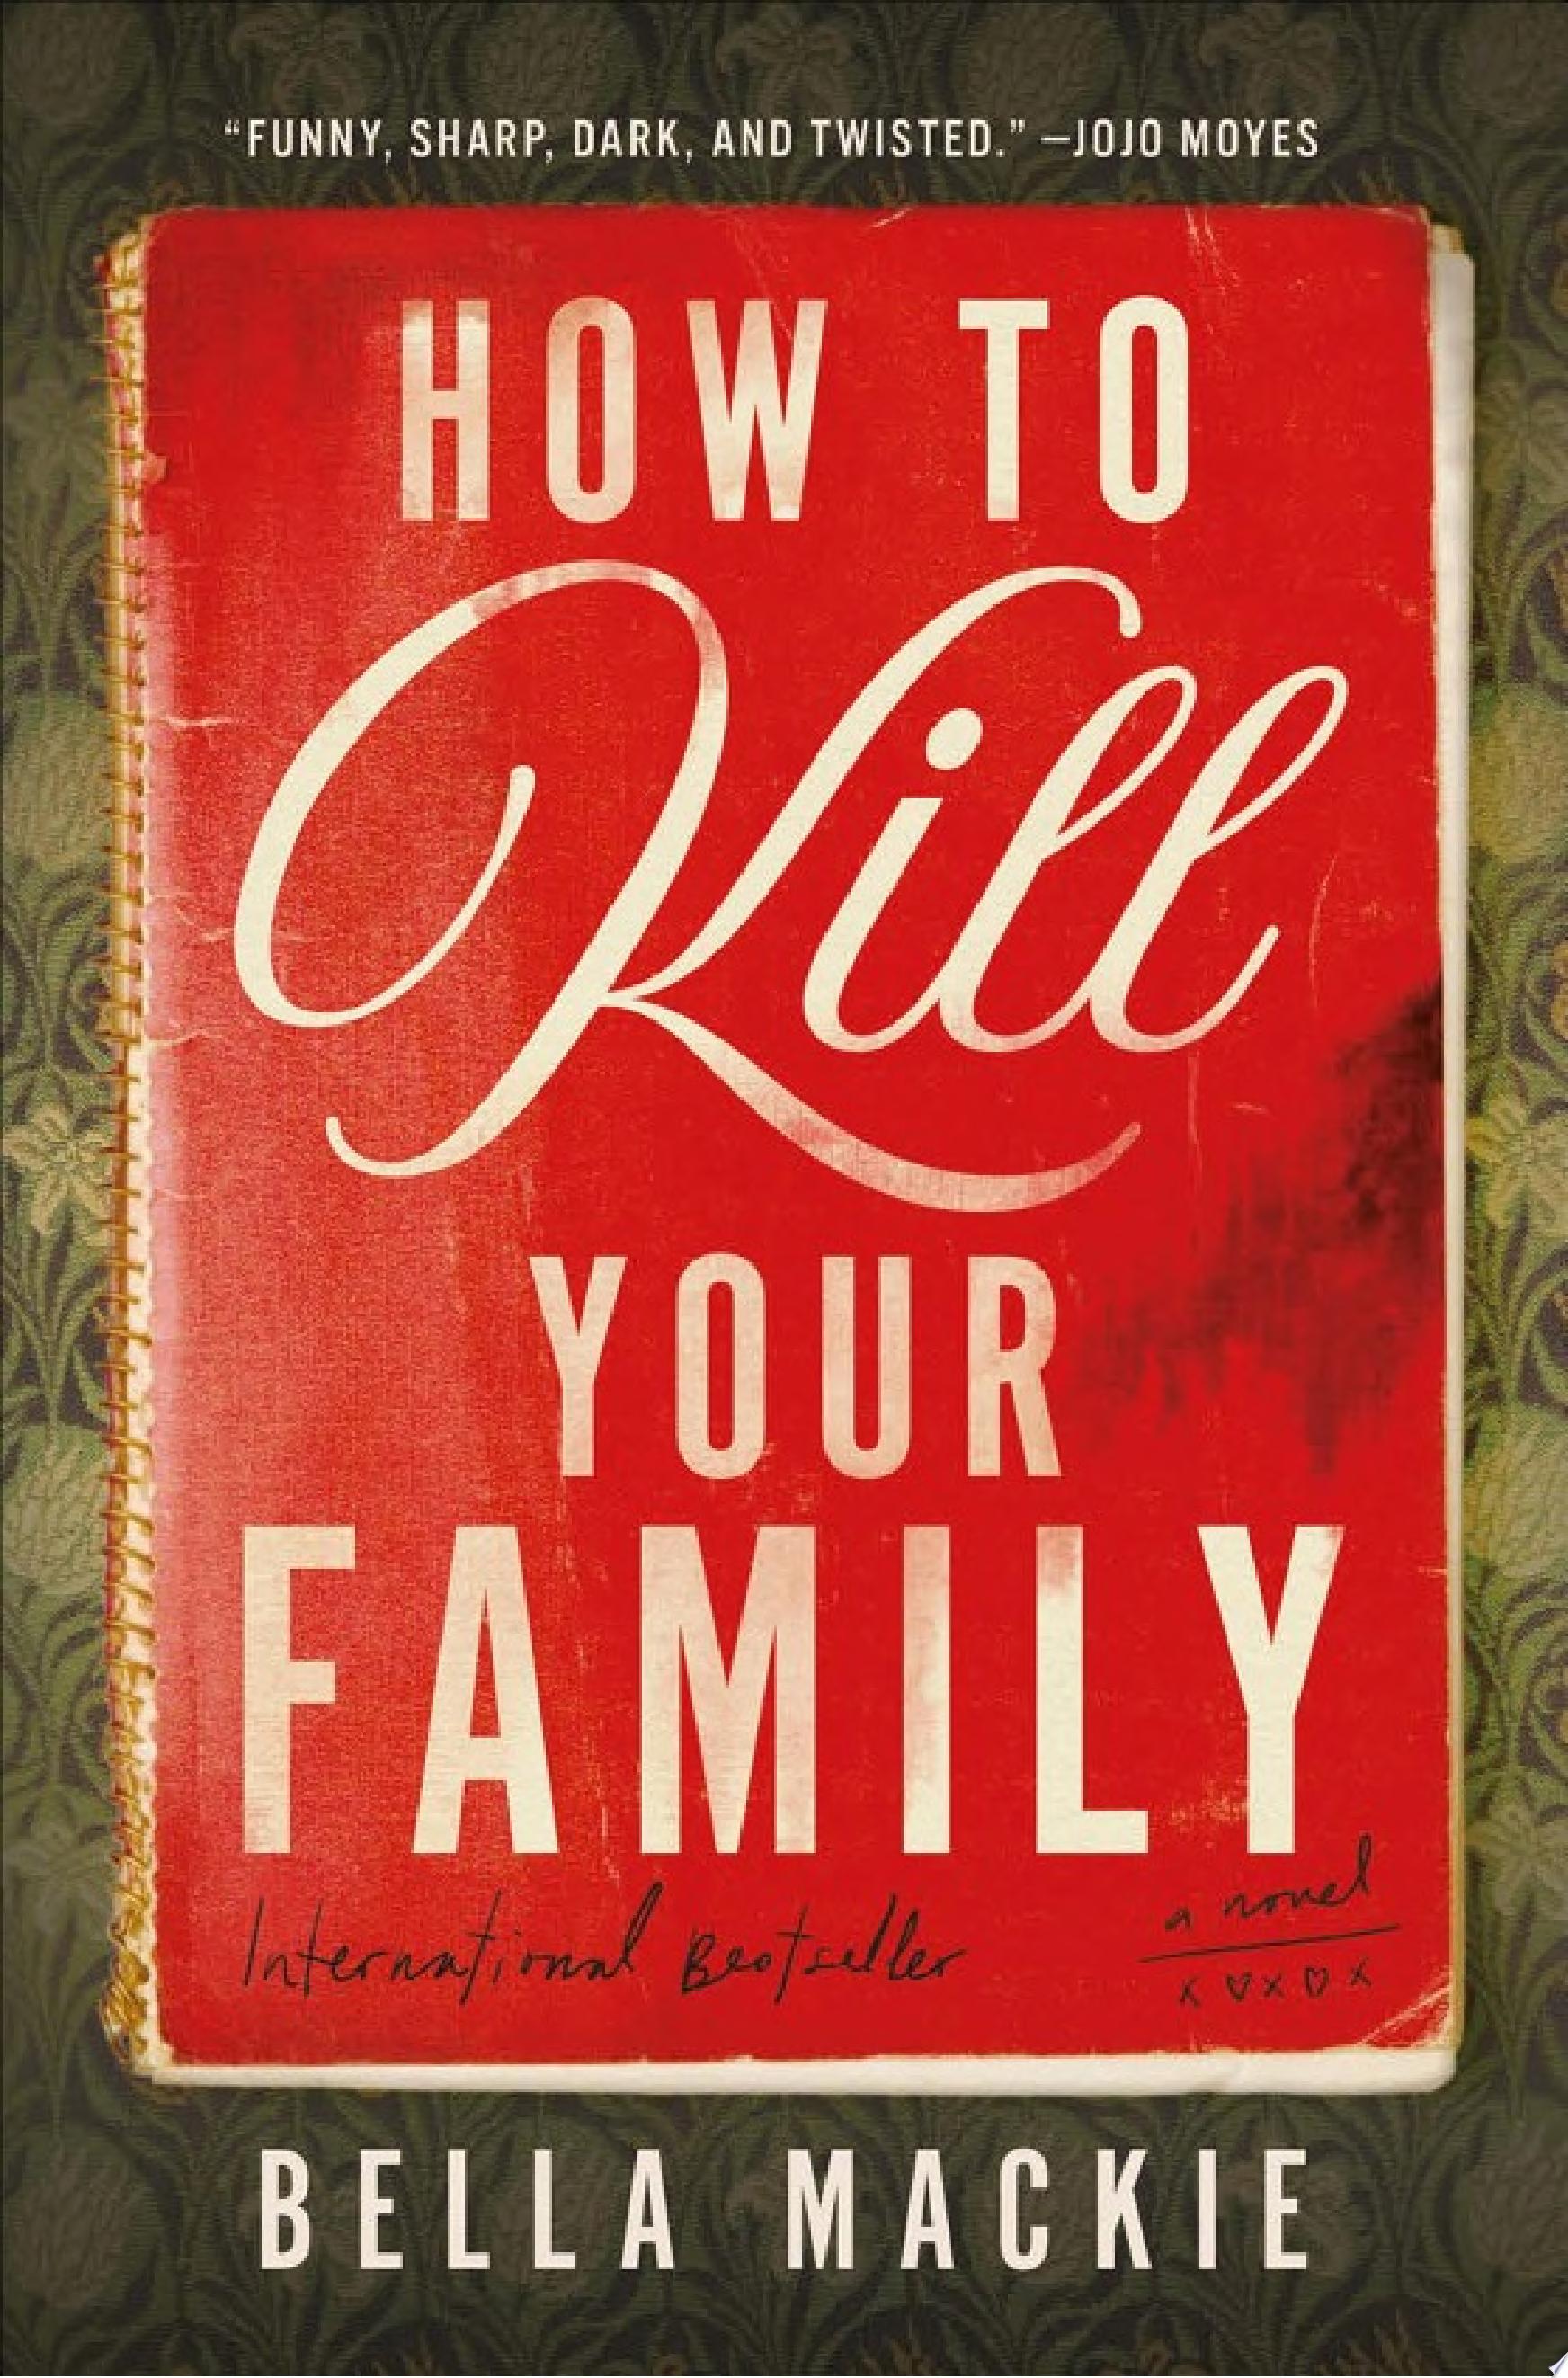 Image for "How to Kill Your Family"